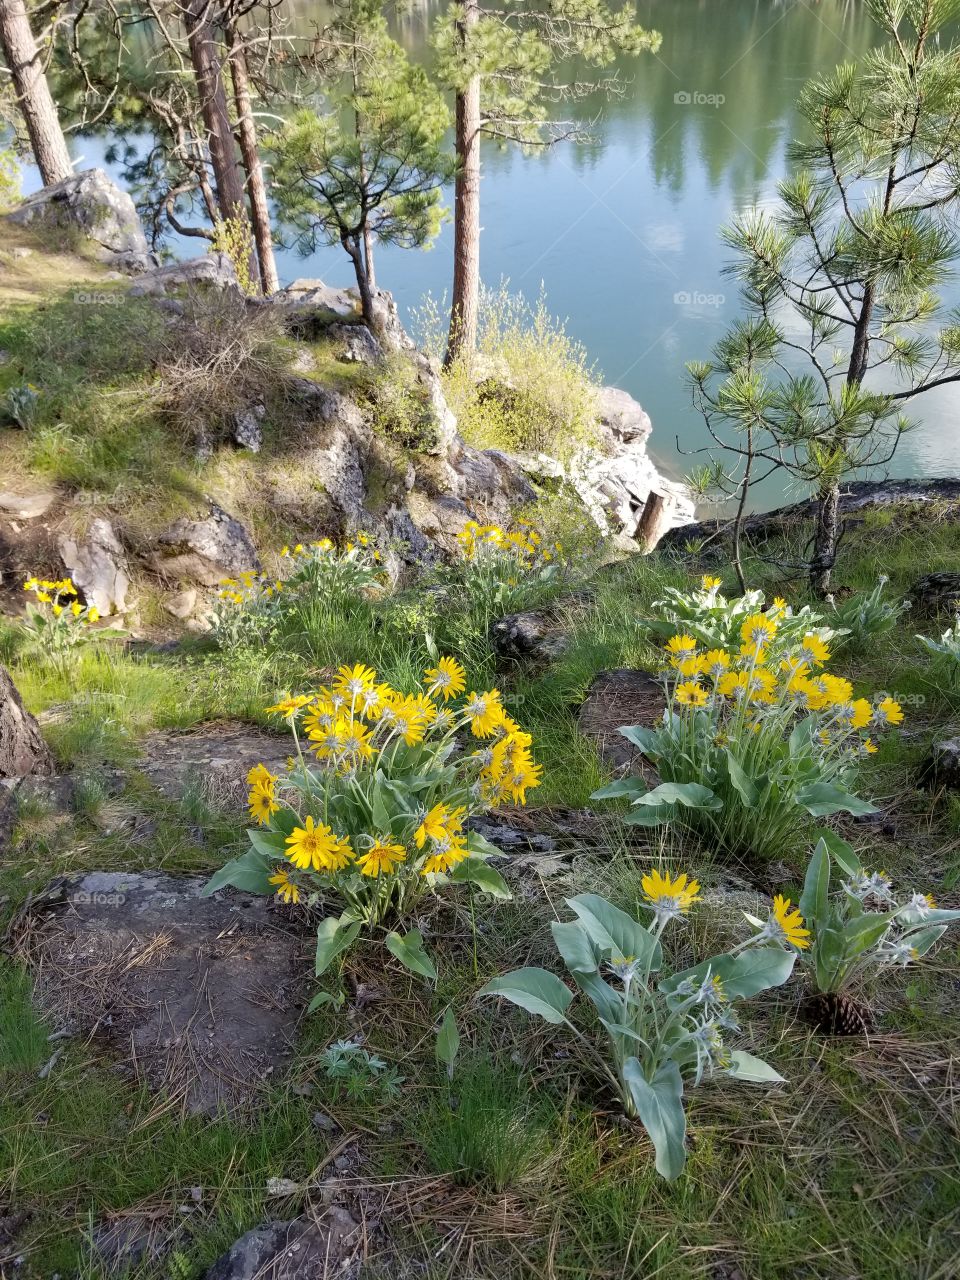 wildflowers along a rivers ledge with trees, rocks,grass and reflection of trees from other side of shore  in the river water